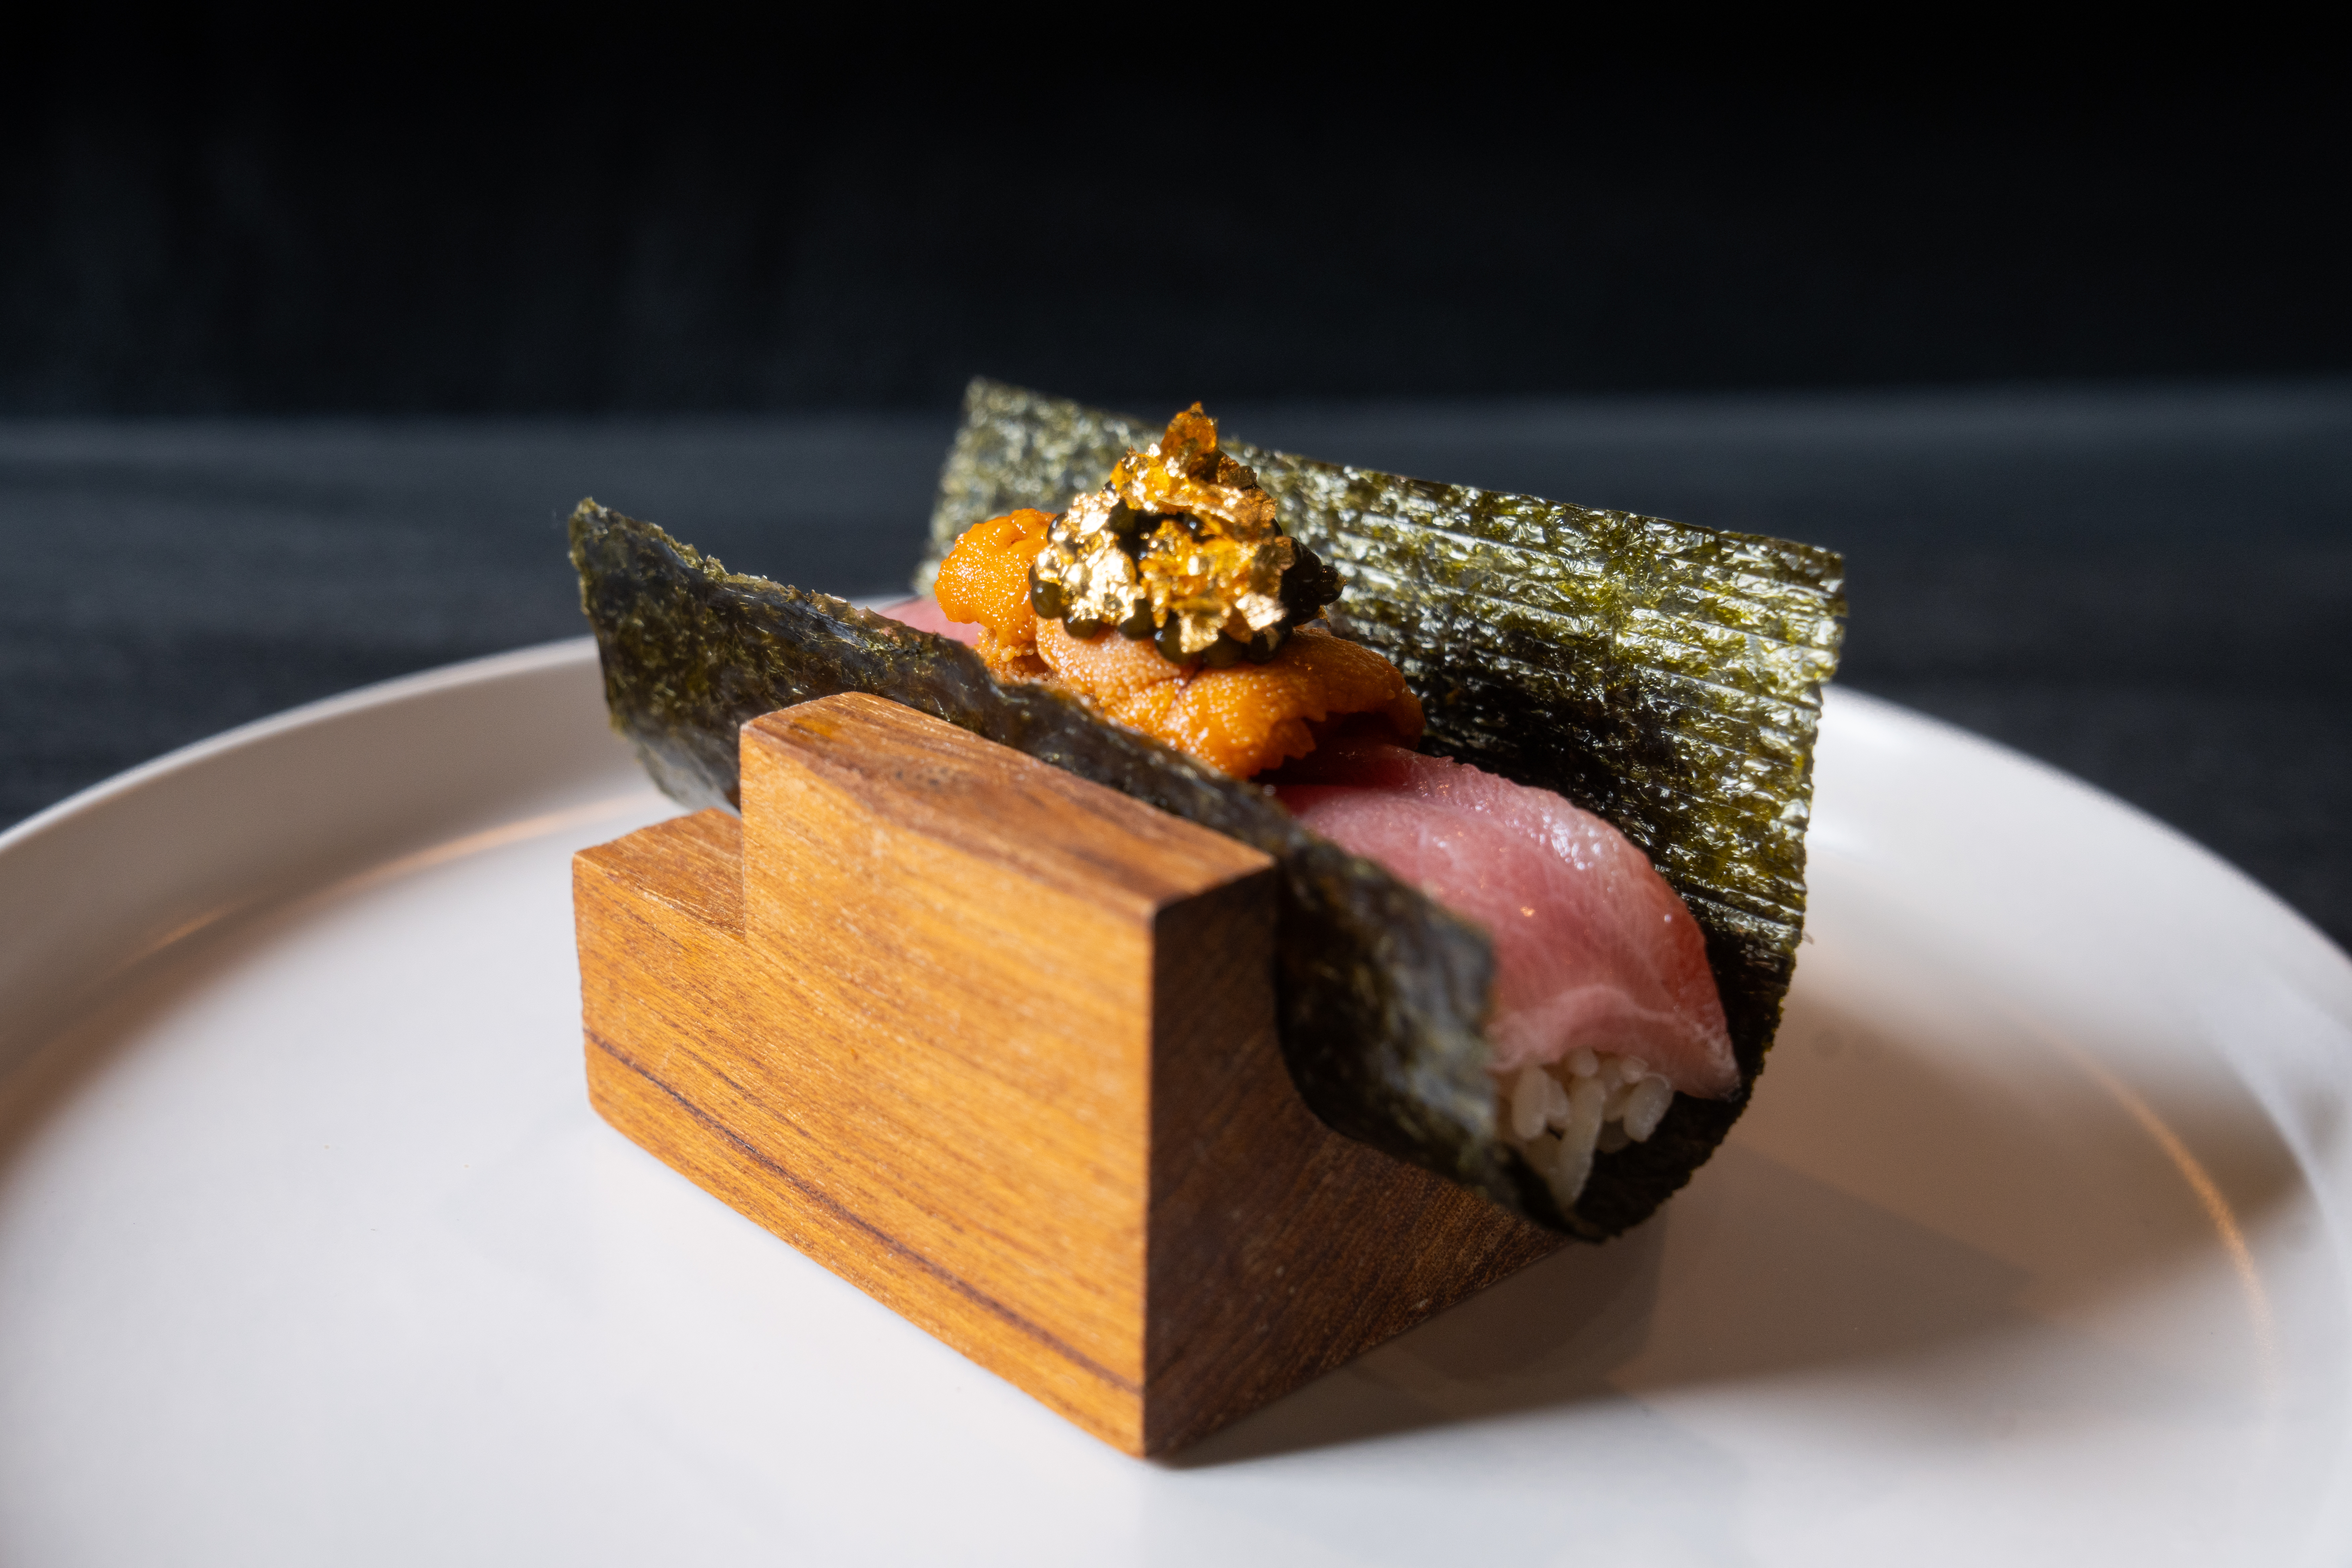 A Norigami handroll with toro and wagyu, topped with uni and a gold flakes.